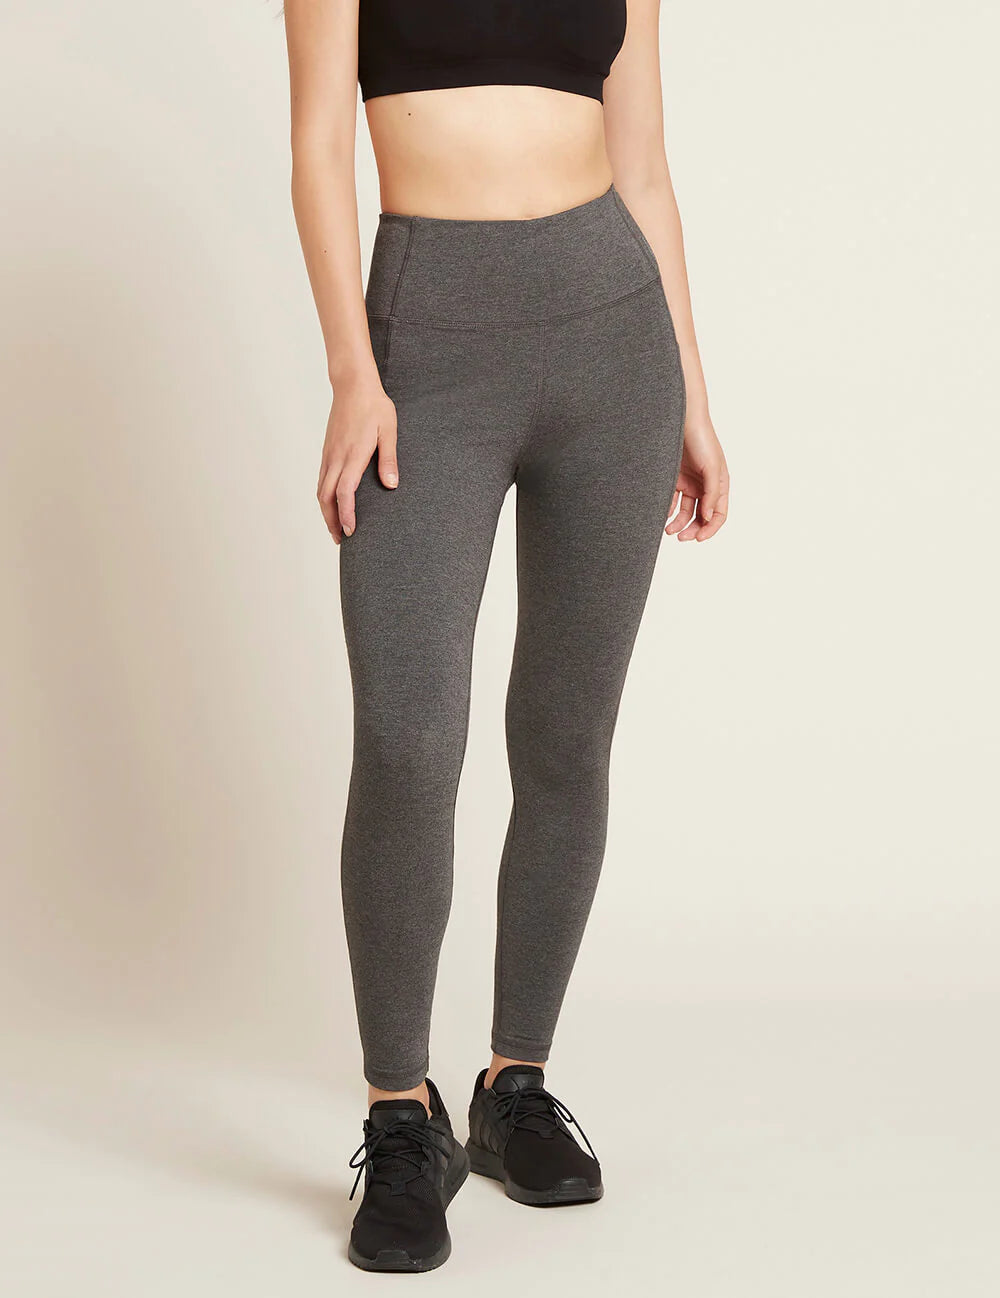 Motivate Full Length High Waist Tights with Pockets